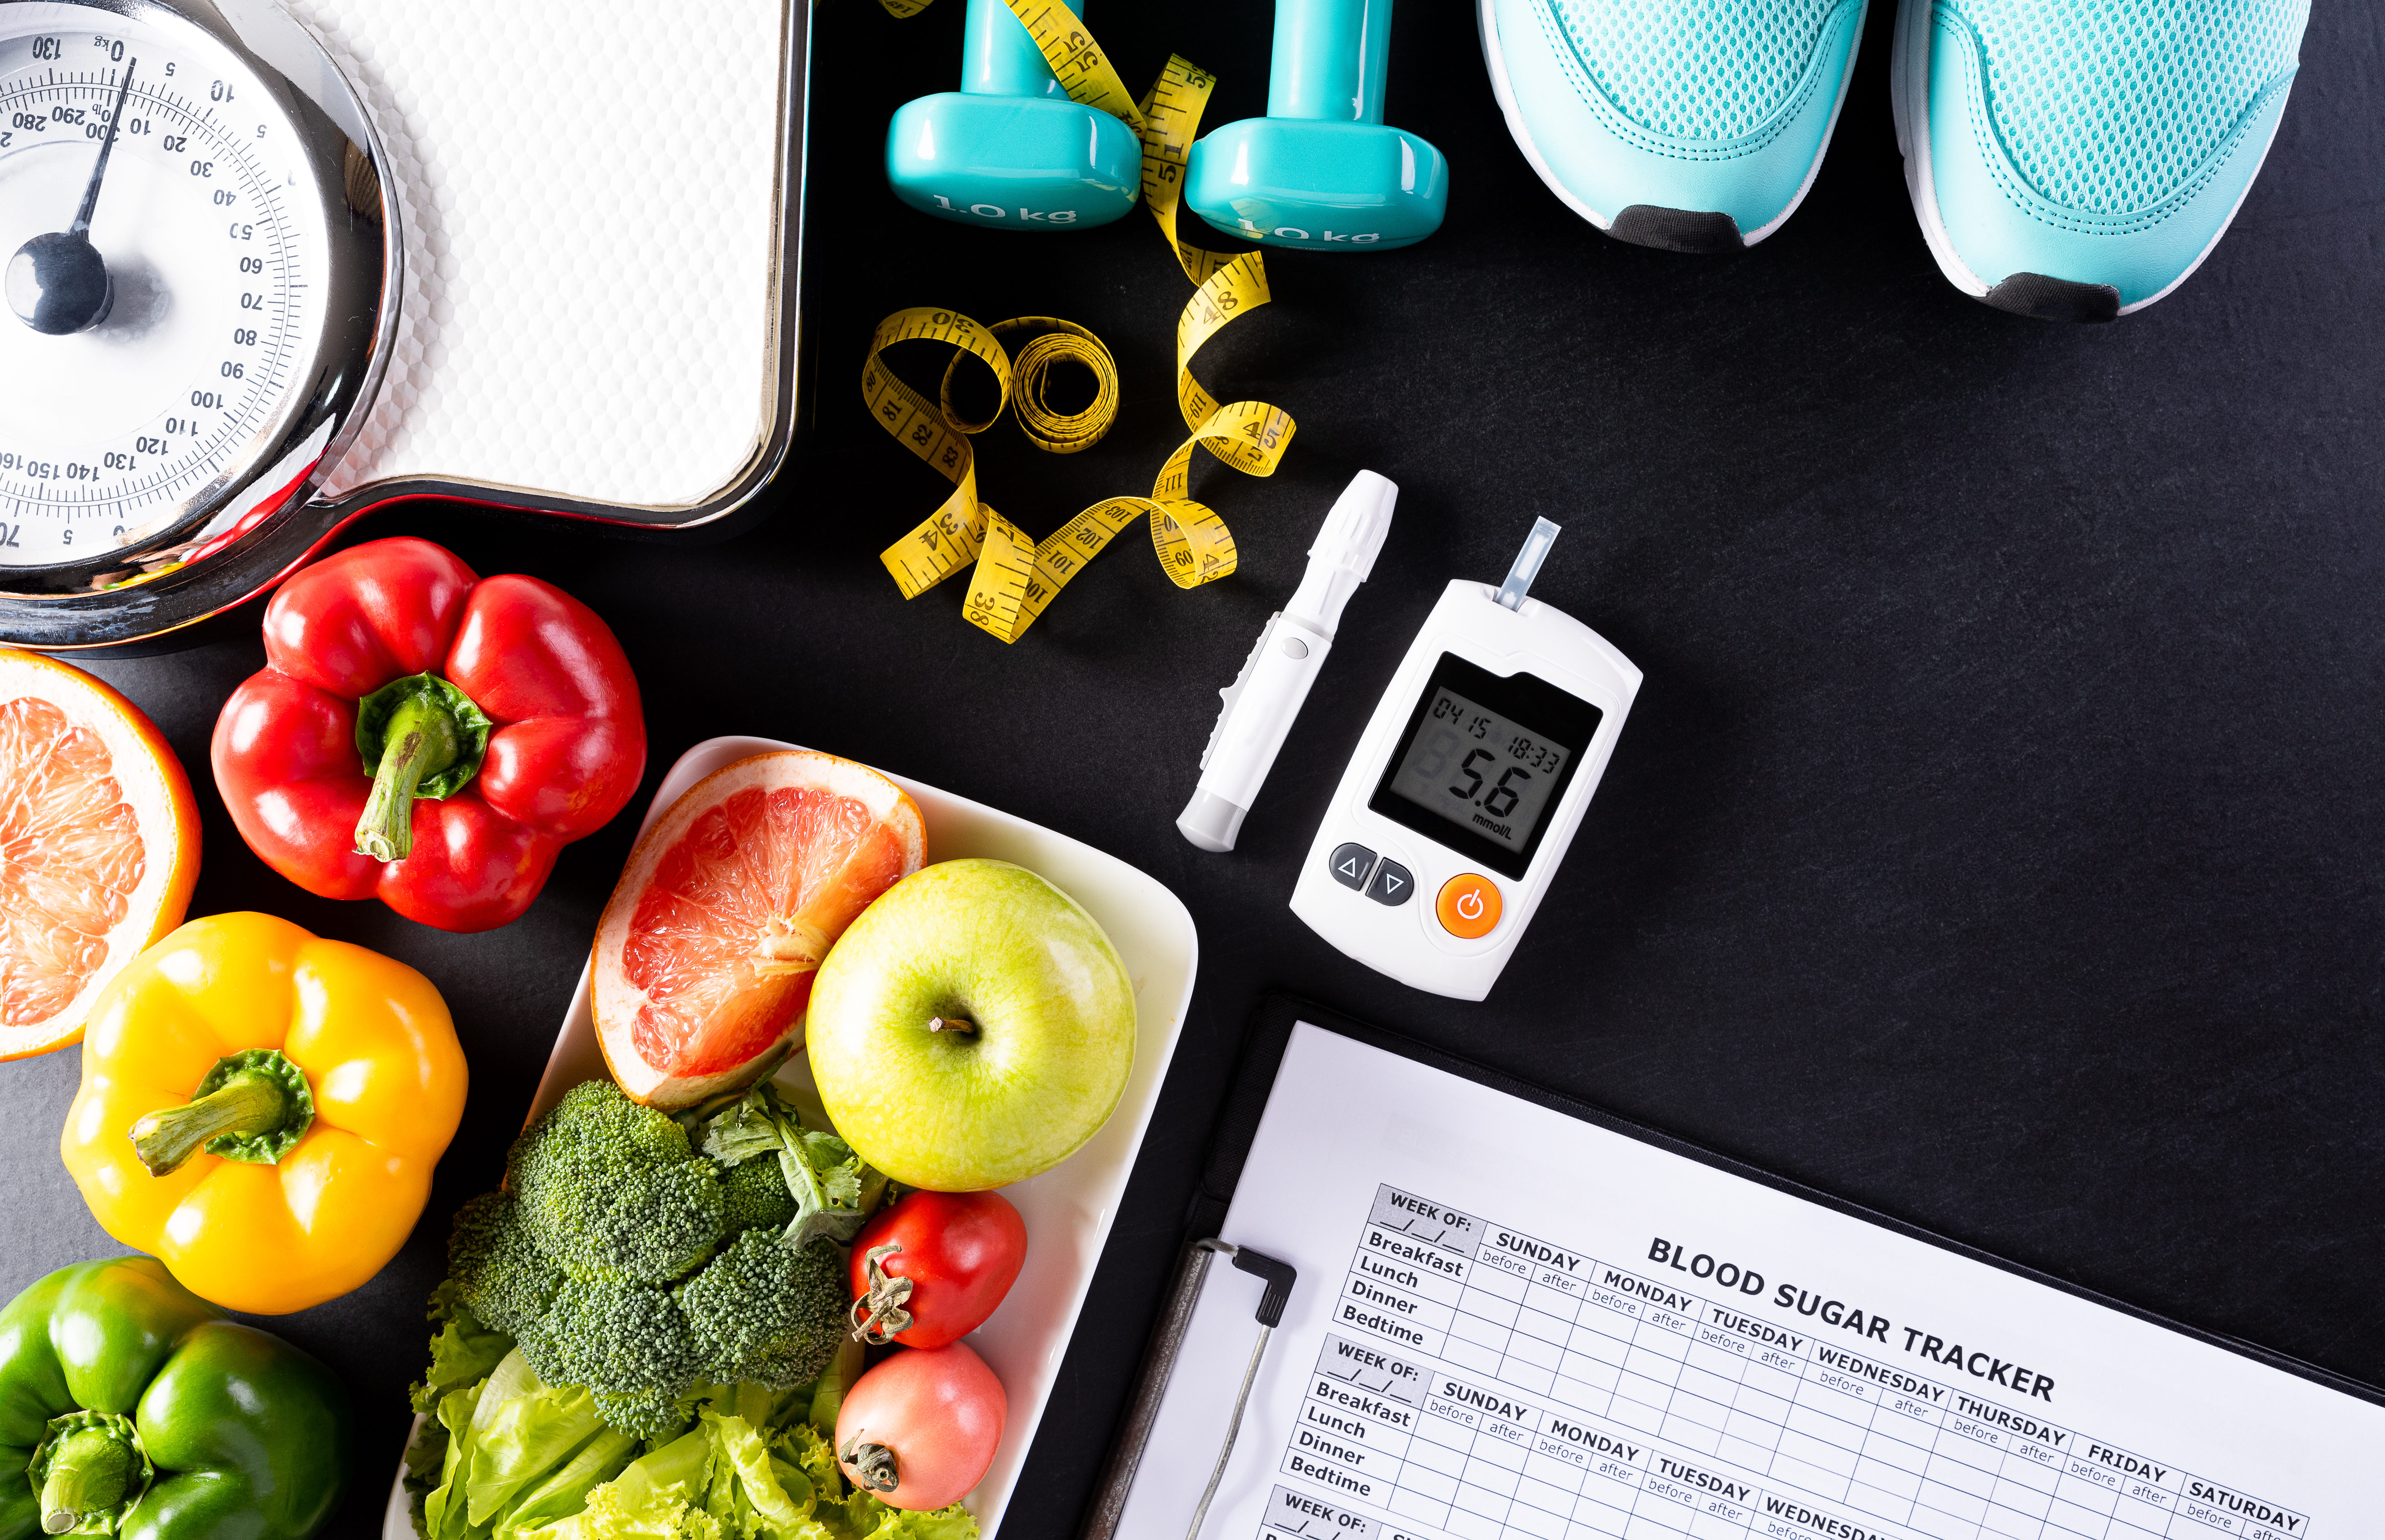 Rethinking type 2 diabetes in the workplace